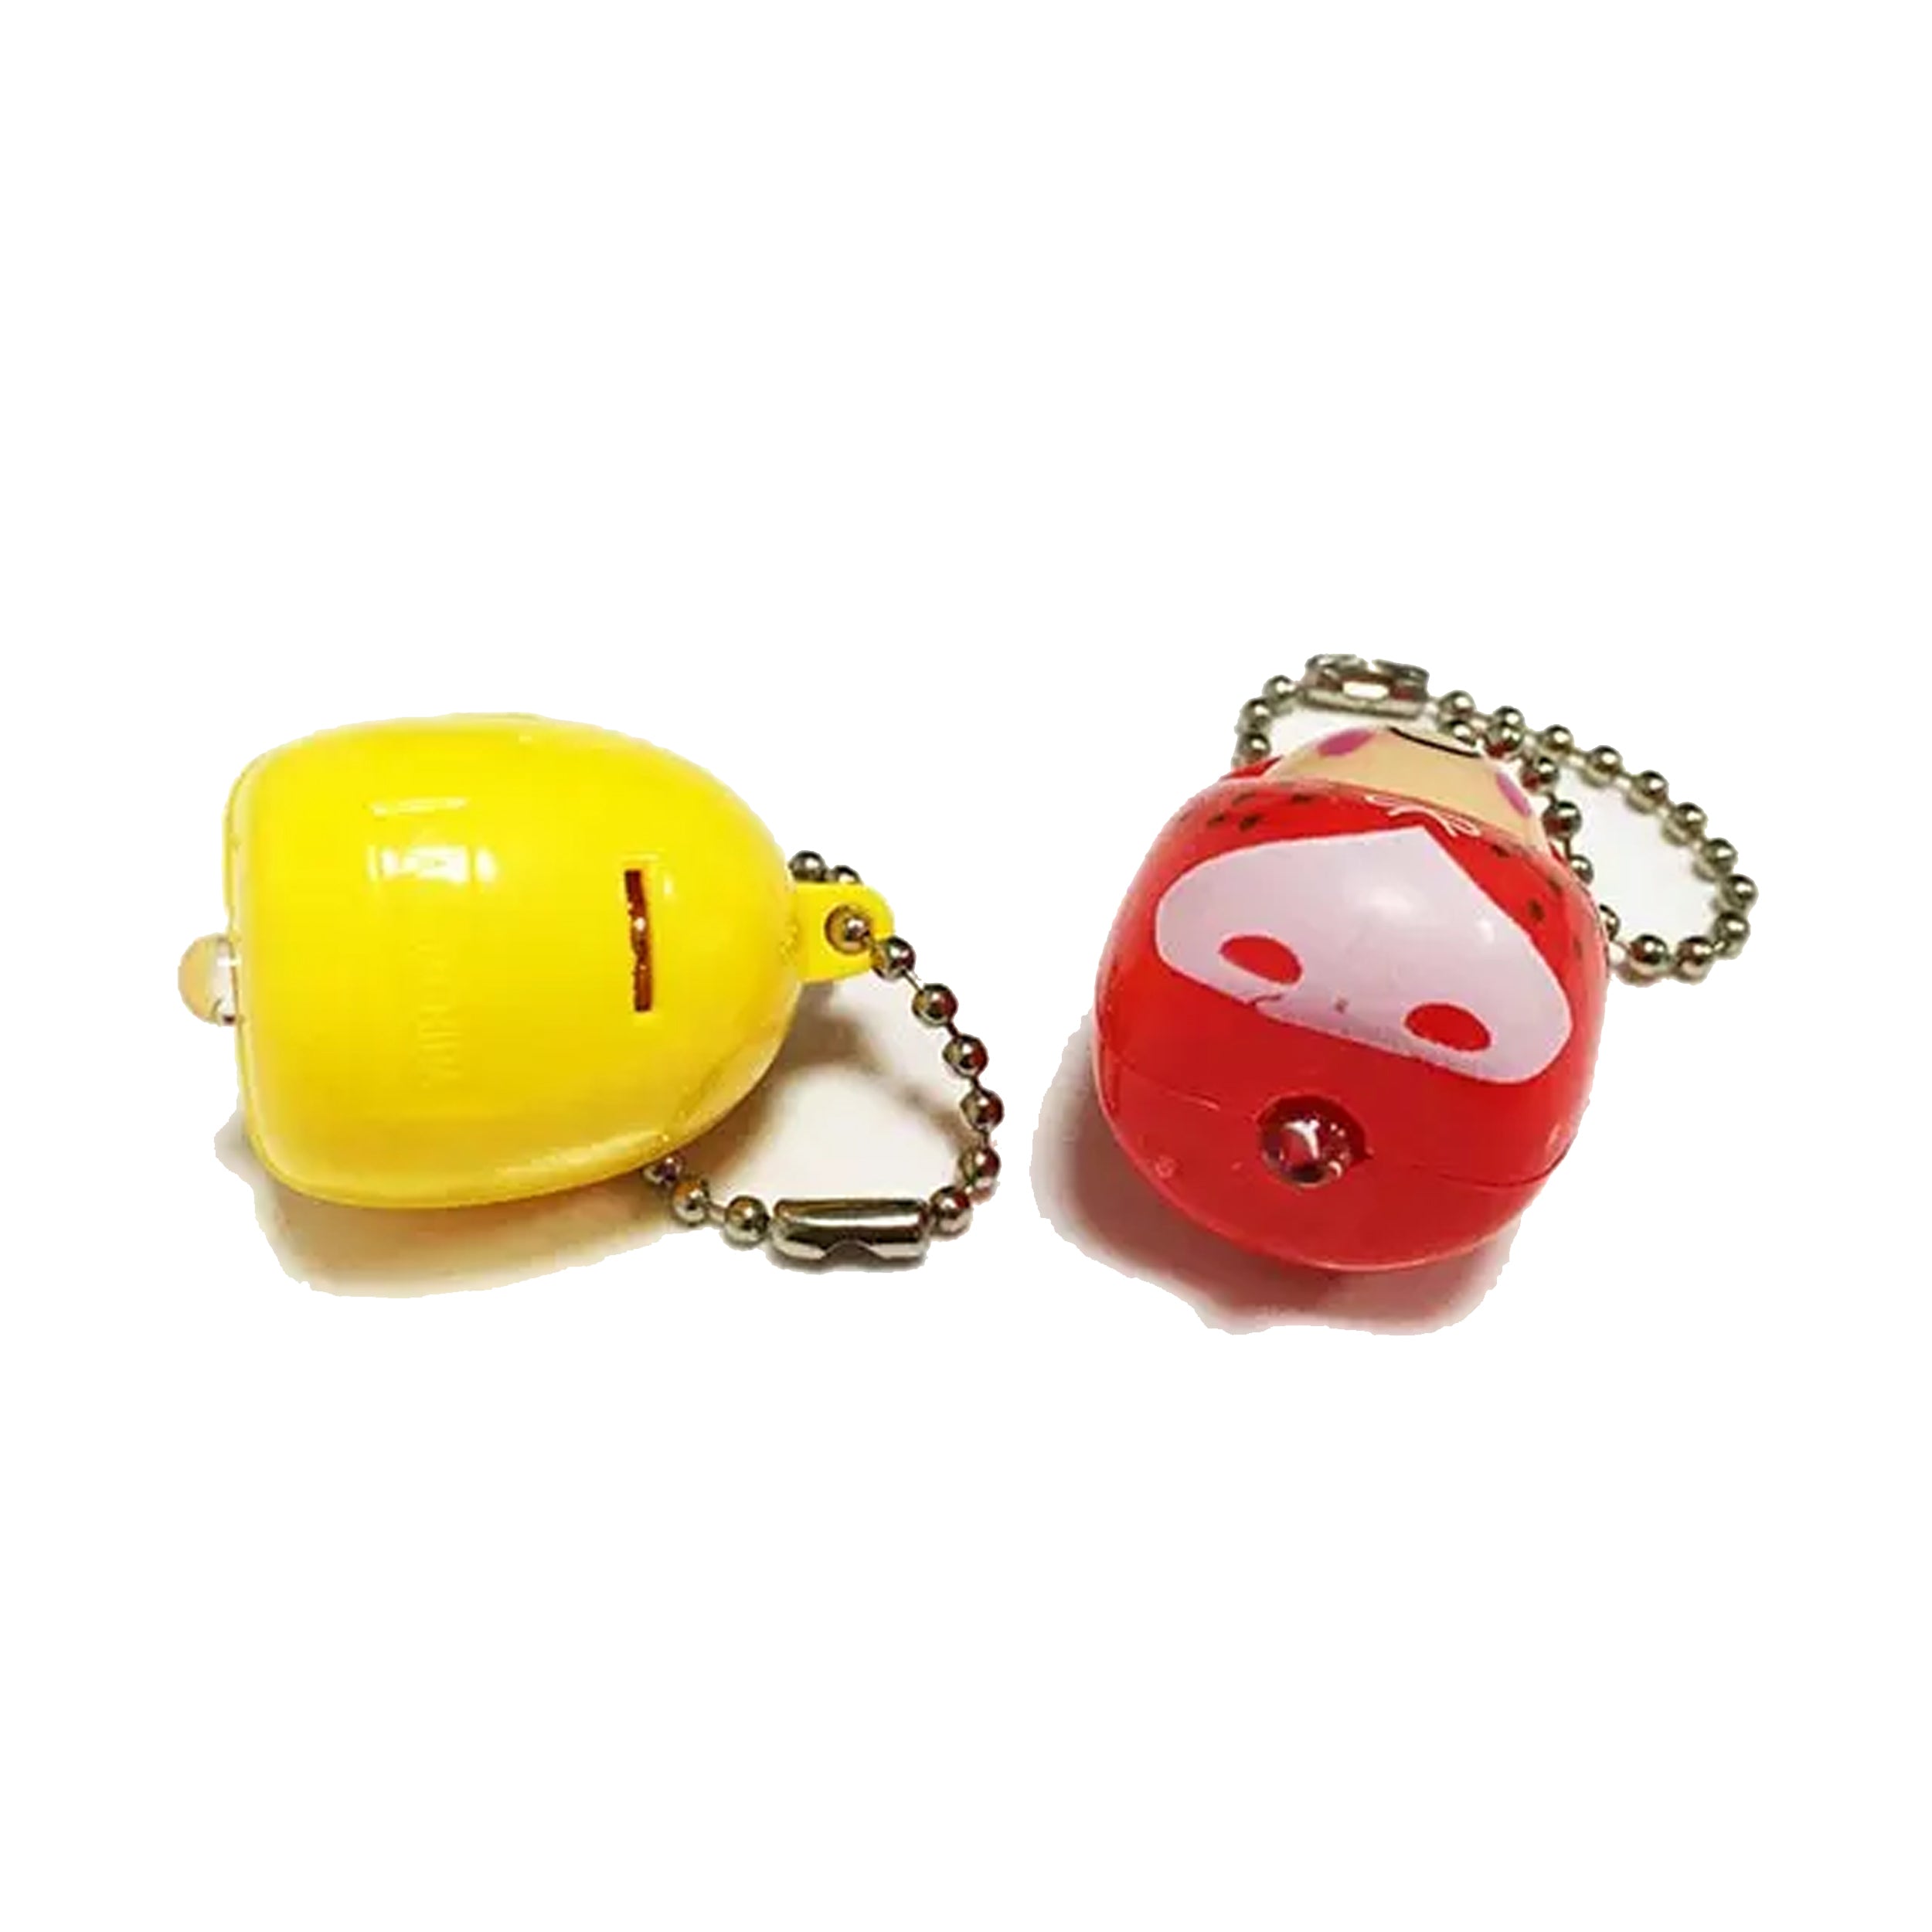 Mini Figure With LED Light Key Chain For Capsule Ball - Fun and Convenient Toy for Kids